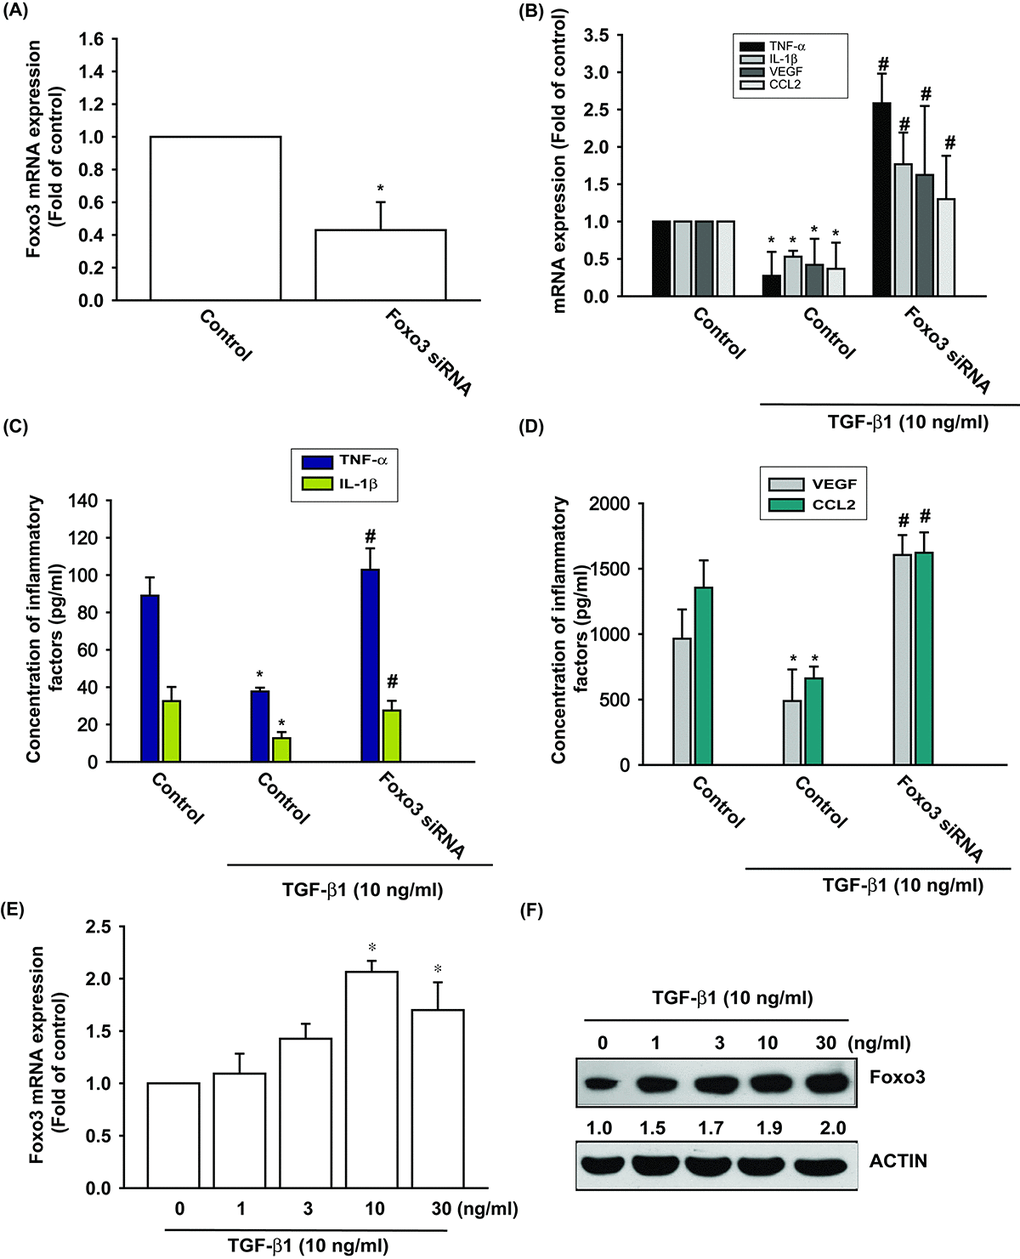 TGF-β1 promotes anti-inflammatory effects via FOXO3-dependent expression in OASFs. (A) OASFs were transfected with FOXO3 siRNA and the FOXO3 mRNA expression was examined by qPCR. (B-D) OASFs were transfected with FOXO3 siRNA, then incubated with TGF-β1 (10 ng/ml). The mRNA and protein levels of TNF-α, IL-1β, VEGF and CCL2 was examined by qPCR and ELISA. OASFs were incubated with 0, 1, 3, 10, and 30 ng/ml of TGF-β1 for 24 h; FOXO3 mRNA and protein expression were examined by qPCR (E) and Western blot (F). Results are expressed as the mean ± SEM. *p p 